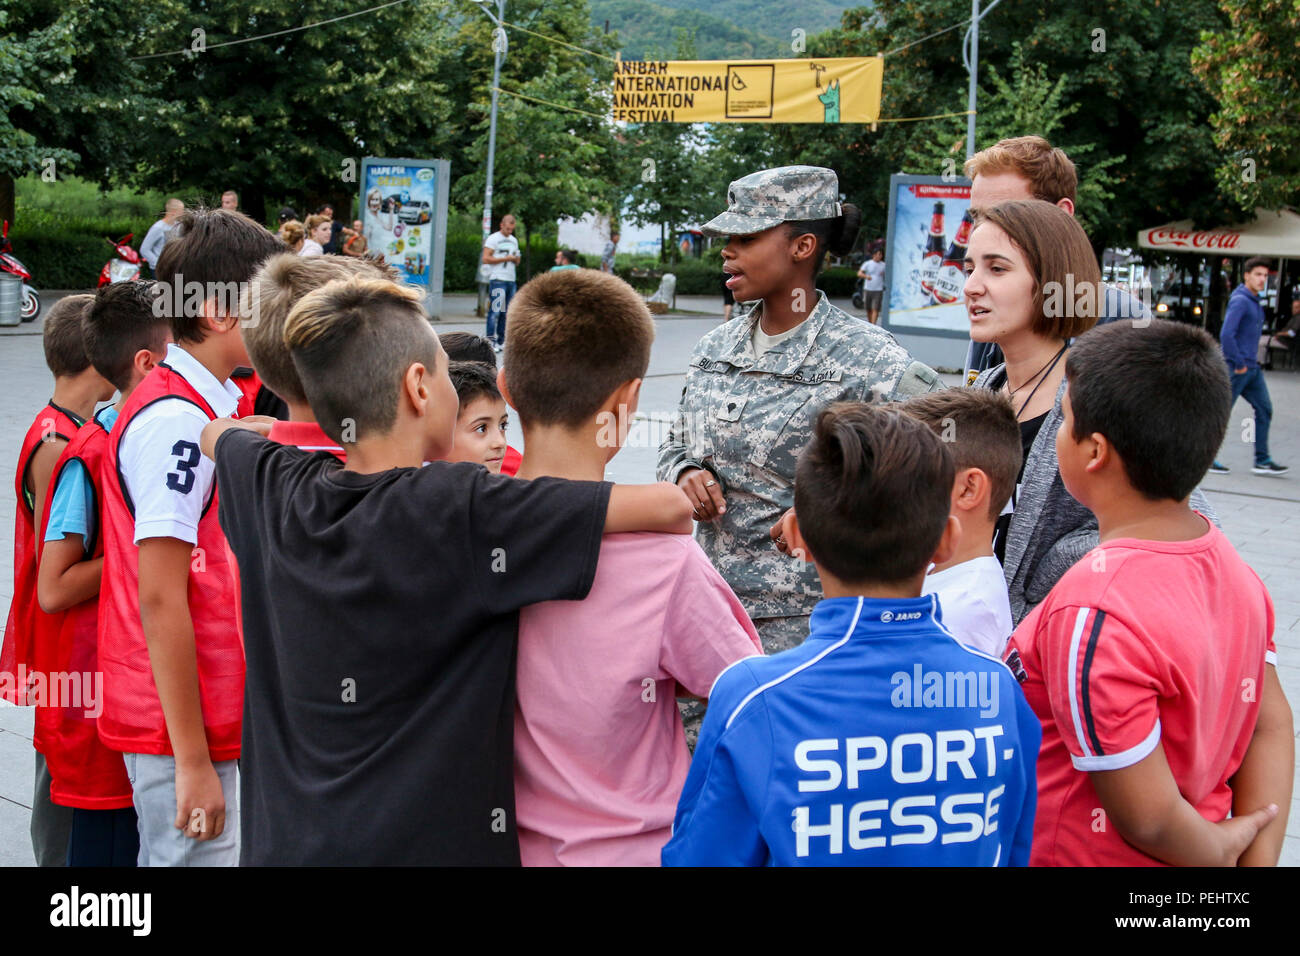 Spc. Travanda Burton, a U.S. Army Reserve Soldier deployed to Kosovo with the 345th Combat Support Hospital, talks to a group of kids about teamwork during the Anibar International Animation Festival Aug. 22, 2015, in Peja, Kosovo, as part of the Pristina Rotary Club’s Violence-Free Future program. Burton volunteered her off-time to lead kids in games and discussions to promote pro-social behaviors among Kosovo’s youth. Burton and the 345th CSH serve as Multinational Battle Group-East’s Task Force Medical, serving on the 20th iteration of NATO’s peace support mission in Kosovo (U.S. Army photo Stock Photo